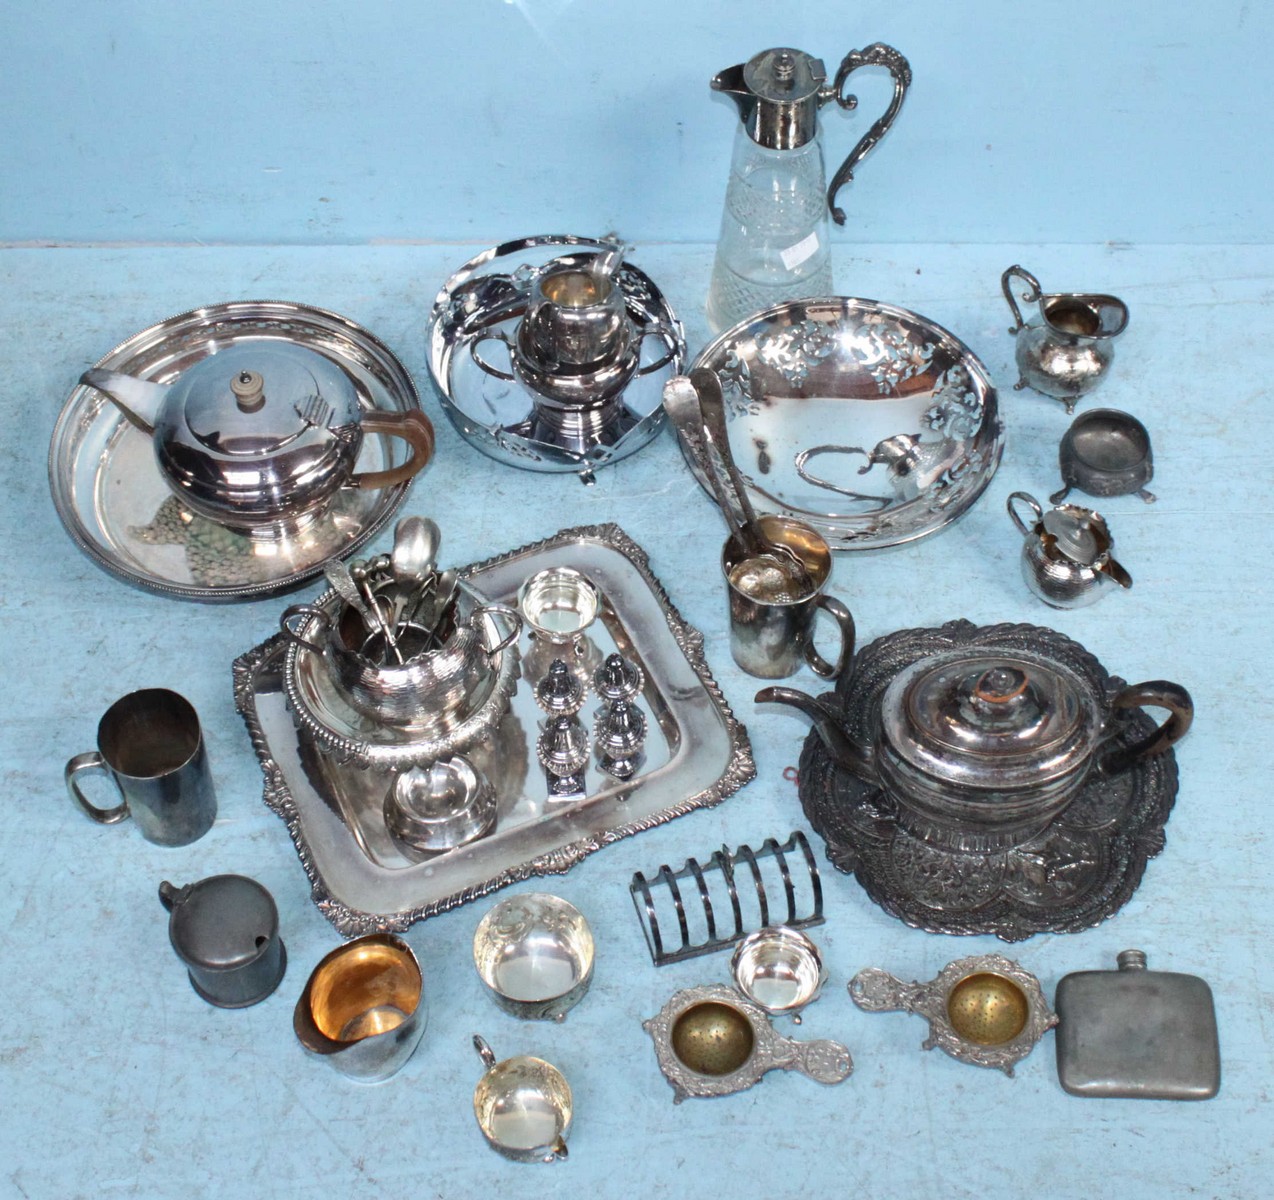 A three-piece silver-plated tea set, together with various plated bon-bon dishes, pierced